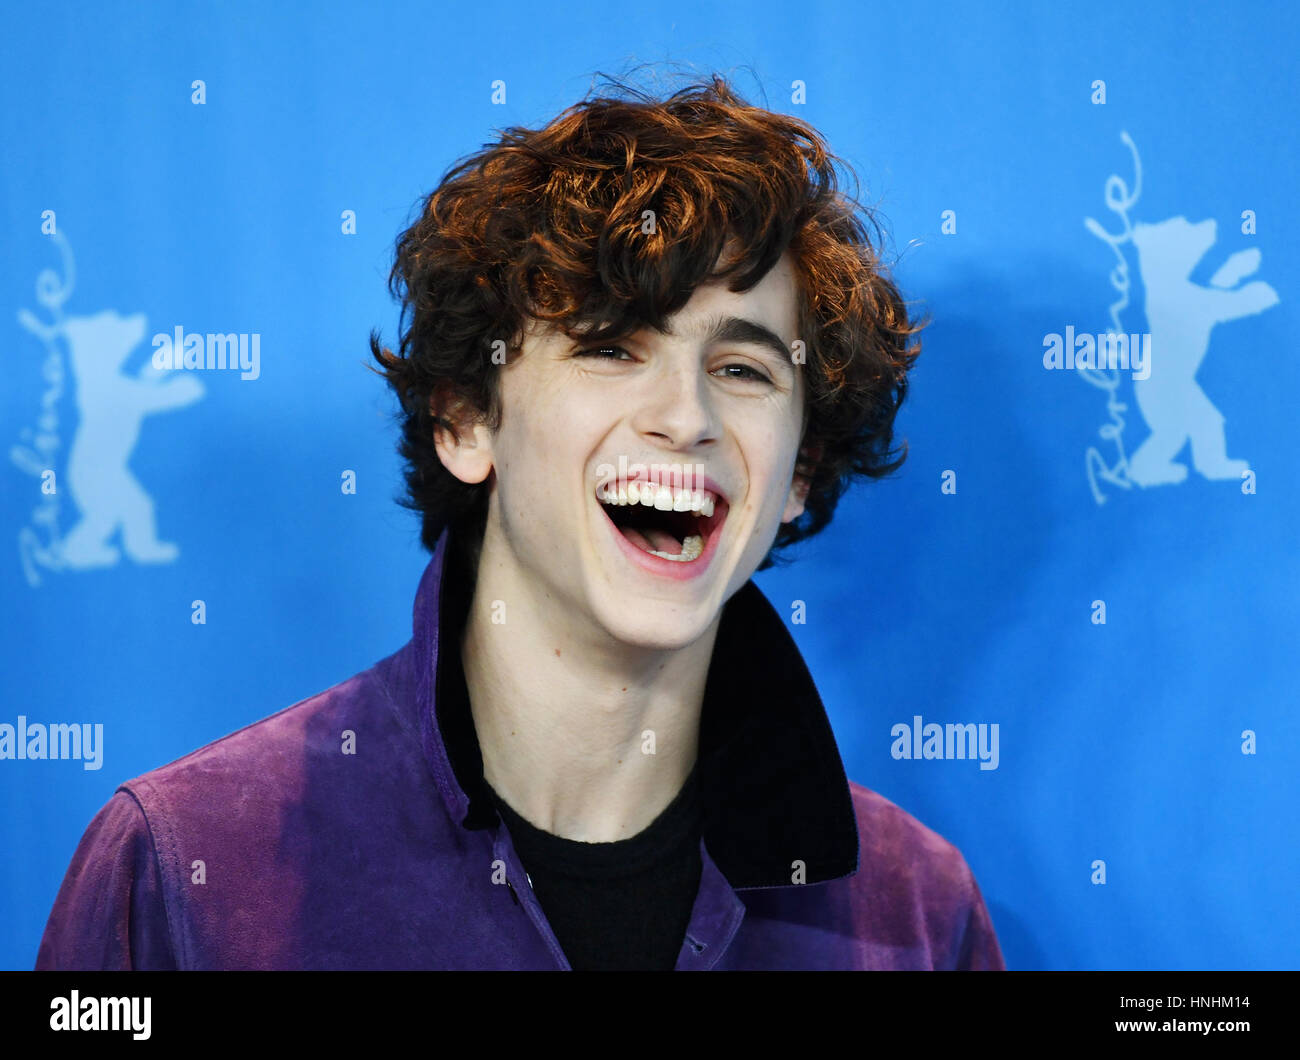 US-American actor Timothée Chalamet, photographed during the photo call for the movie 'Call me by Your name' during the 67th International Berlin Film Festival in Berlin, Germany, 13 February 2017. The movie runs in the Panorama special. Photo: Jens Kalaene/dpa-Zentralbild/dpa Stock Photo